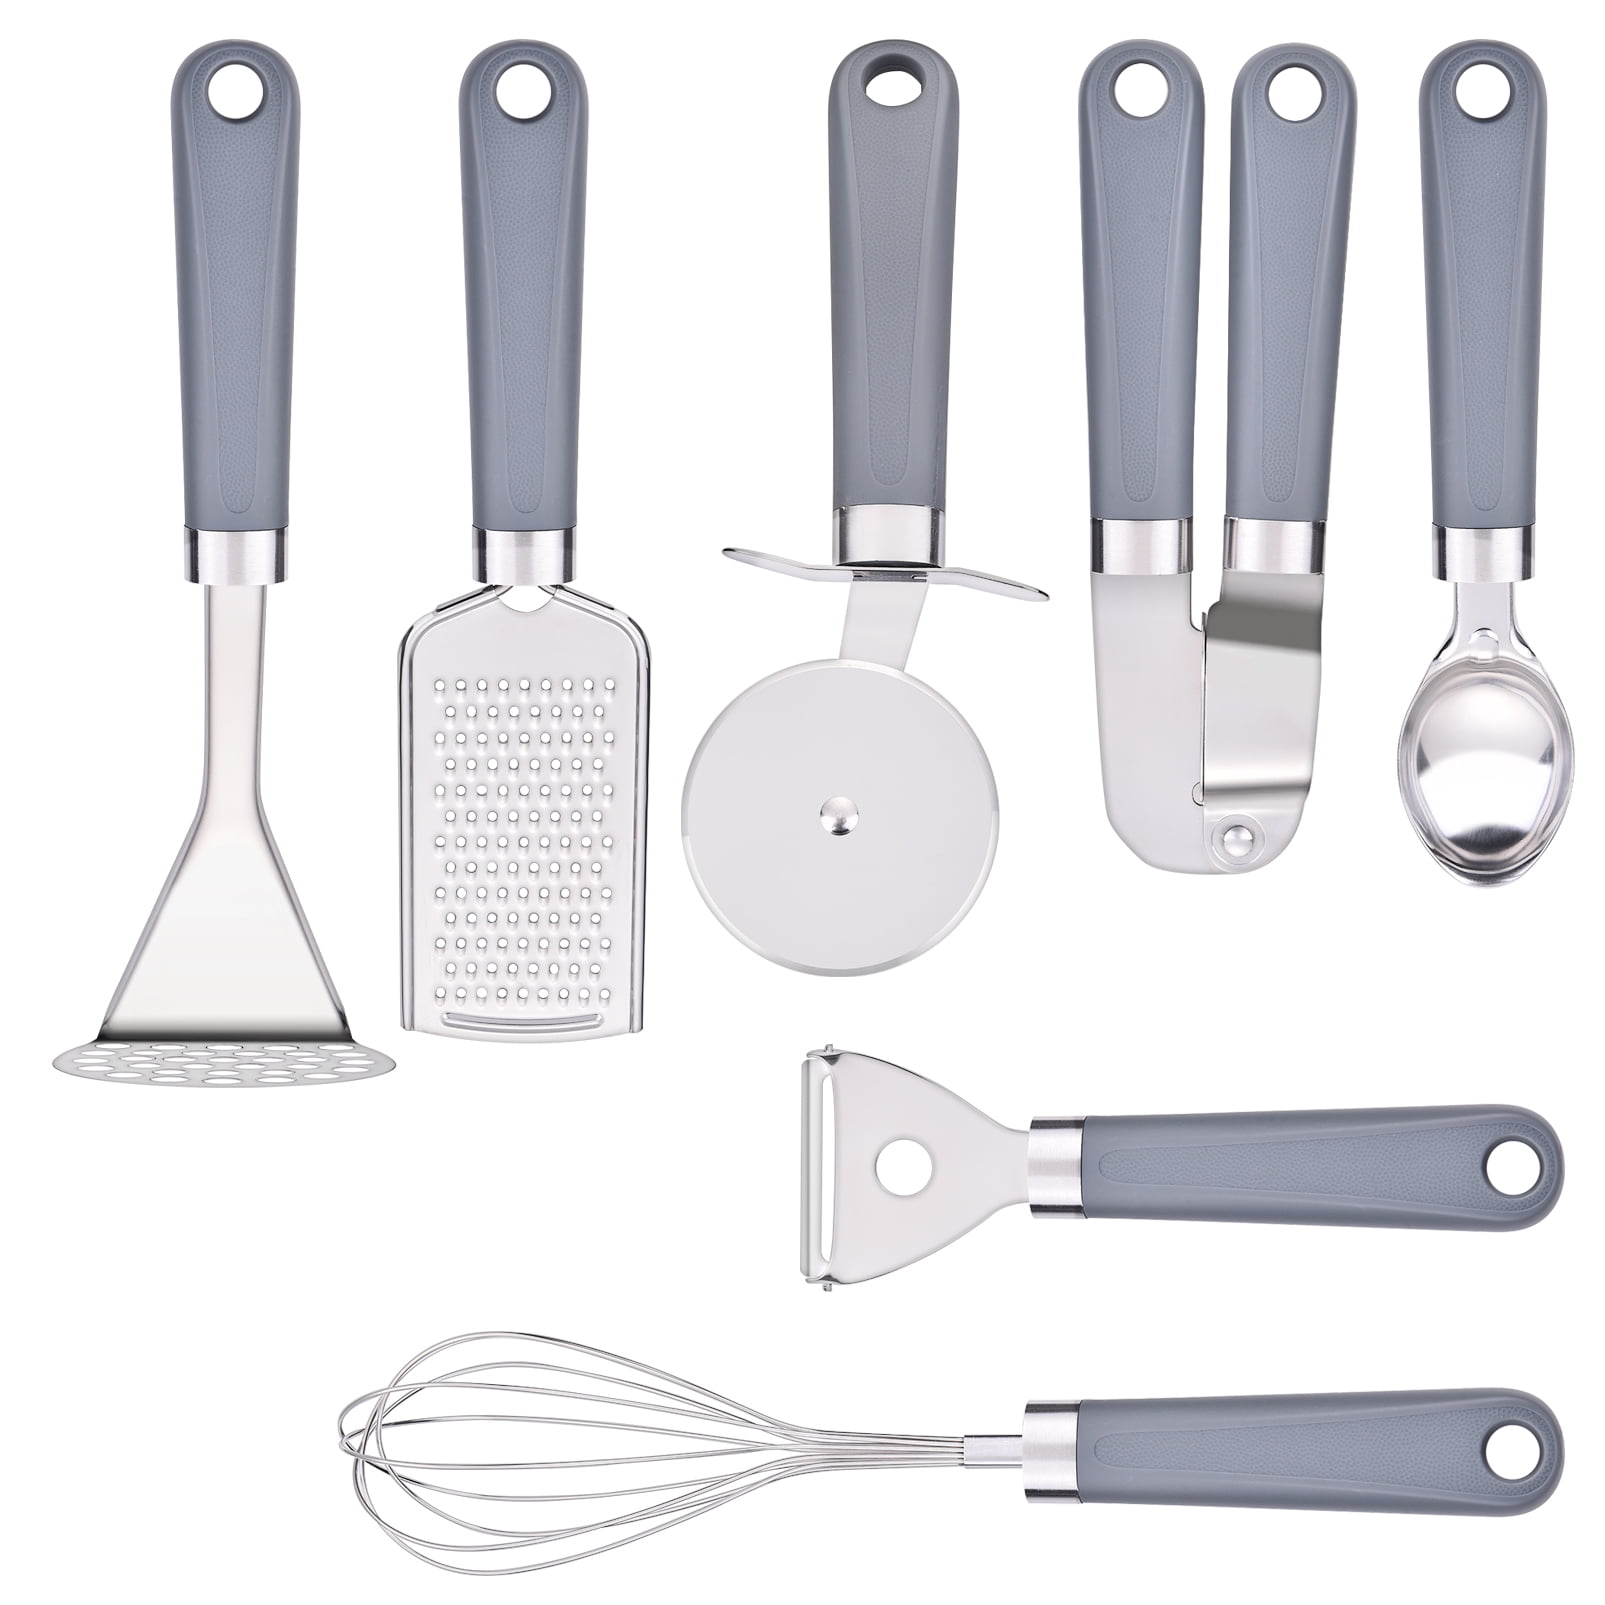 Kitchen Gadgets Set for Pizza 25 Pcs Stainless Steel Kitchen Utensils Set  with Grey Soft Touch Anti Slip Handles   Non Stick Kitchen Tool Set with ...